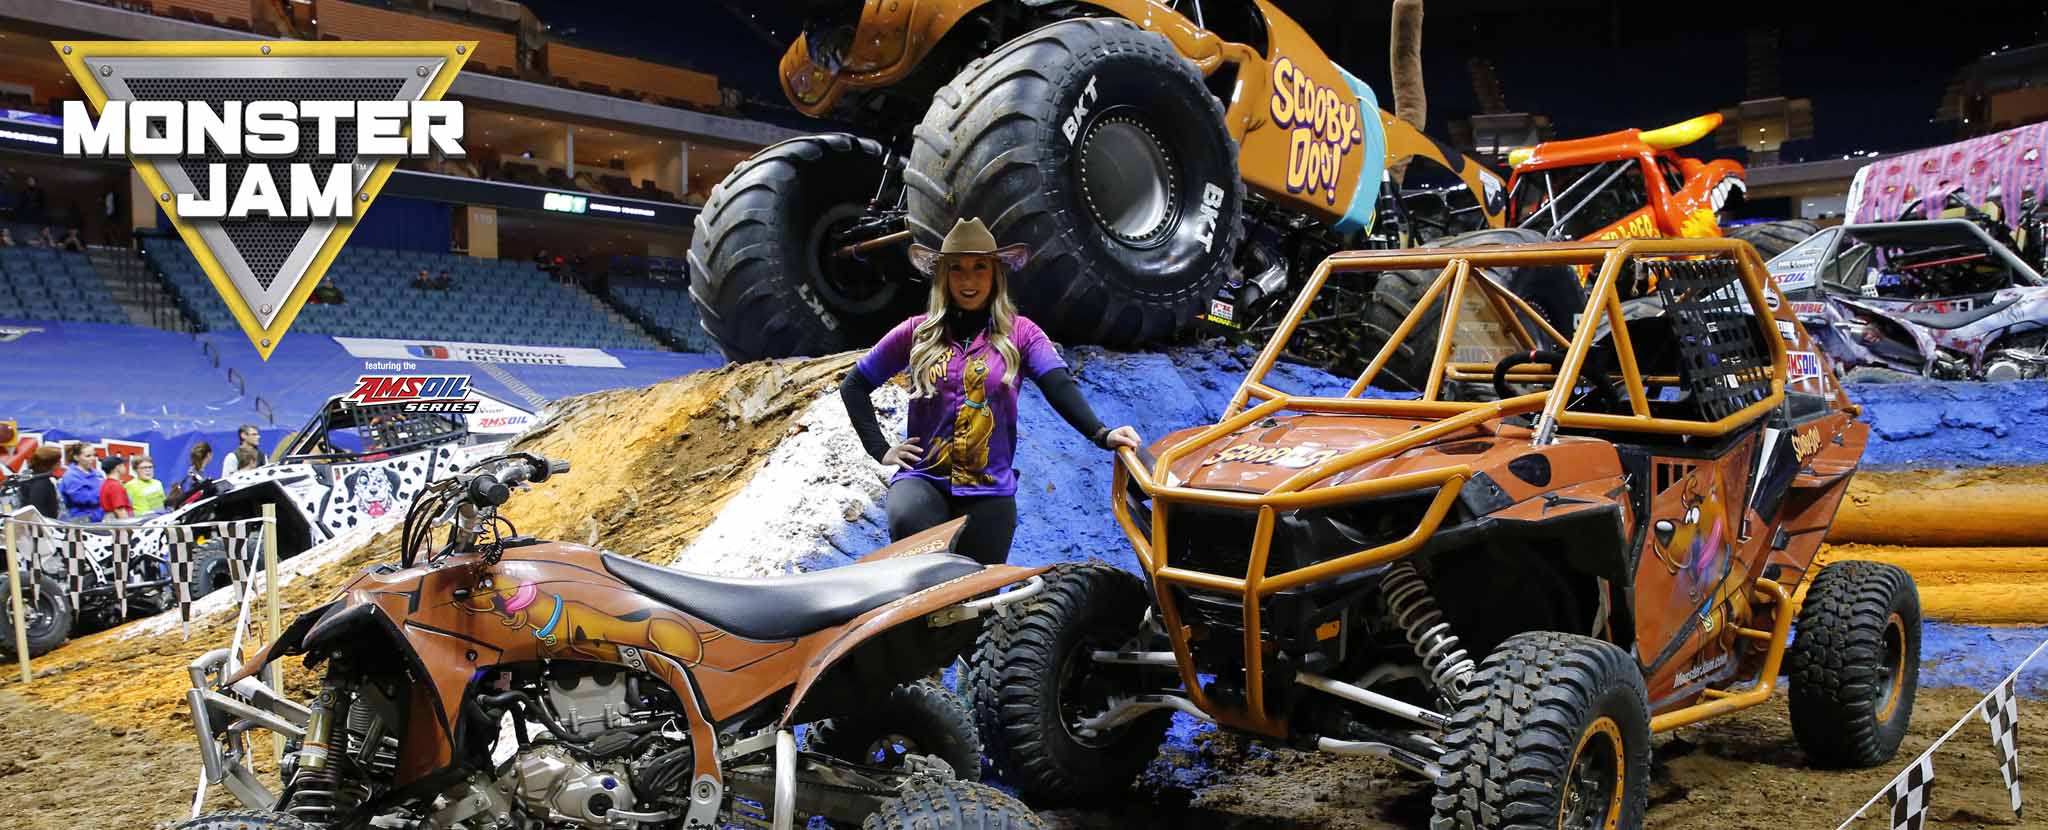 Amazing Monster Jam Pictures & Backgrounds